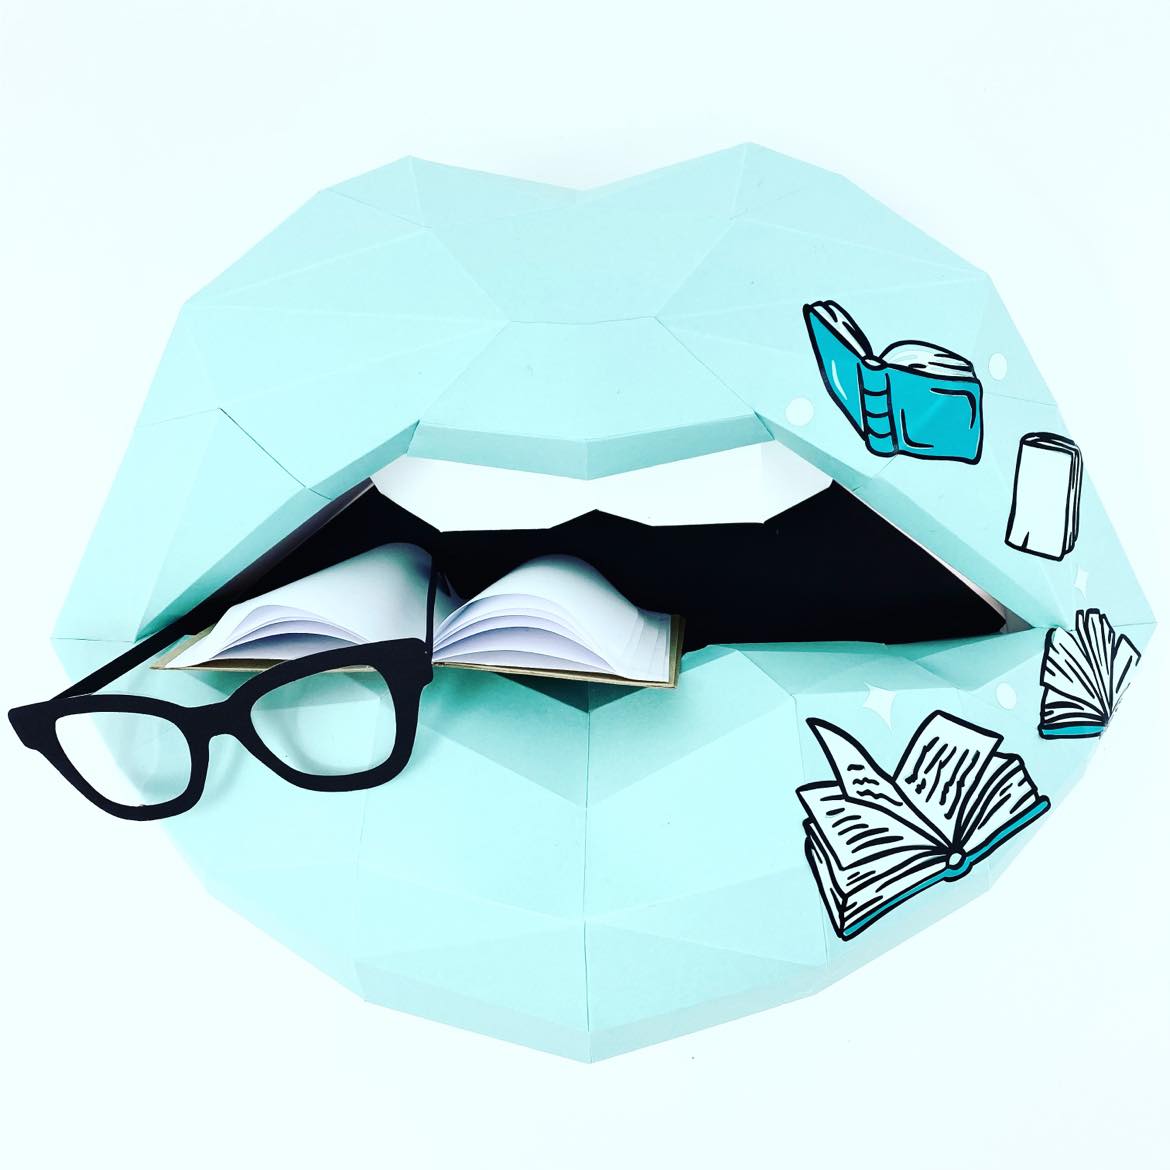 Paper Lips Book or library inspired  Wall Art for Home Office or Salon |  Fashion Lover | Gift for Makeup Artist - Pucker Up Lips and Accessories